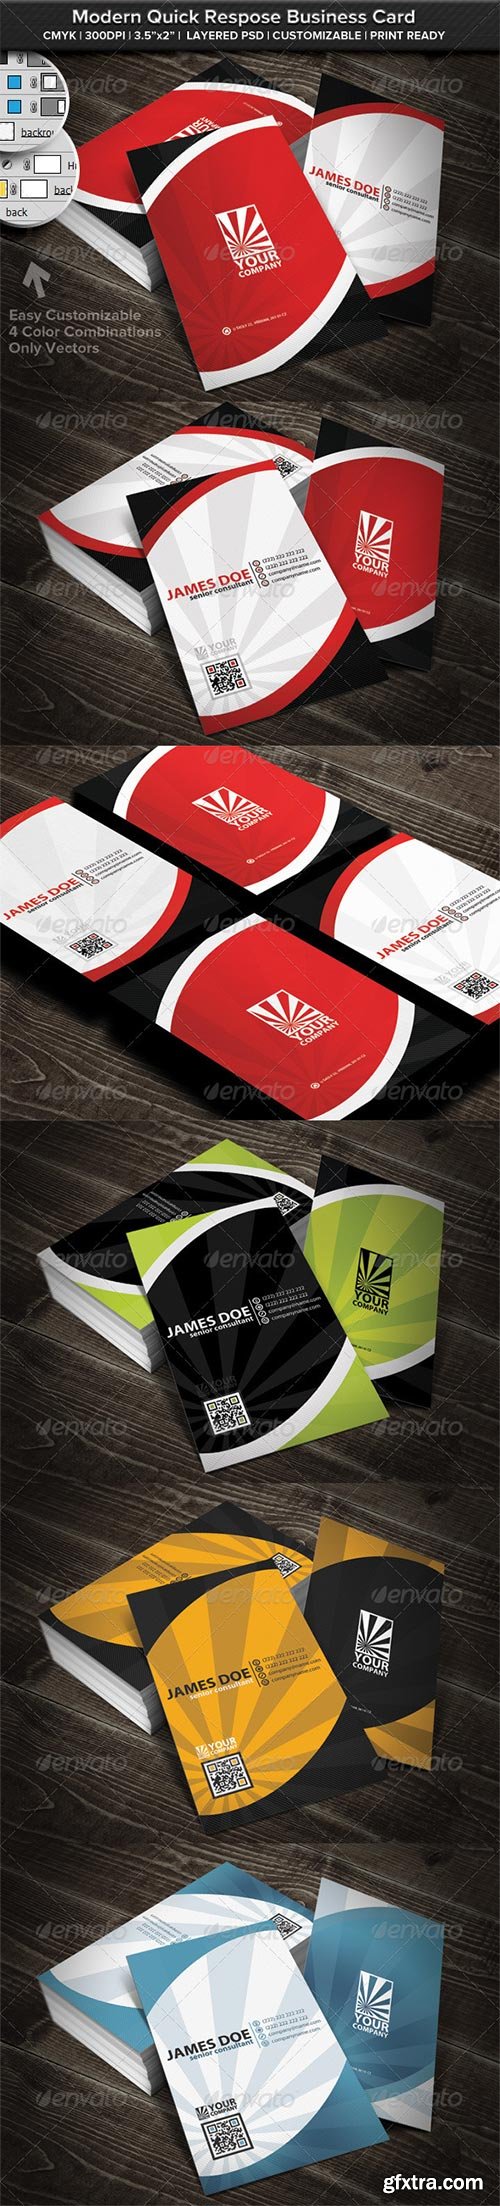 GraphicRiver - Modern Rounded Quick Respose Business Card